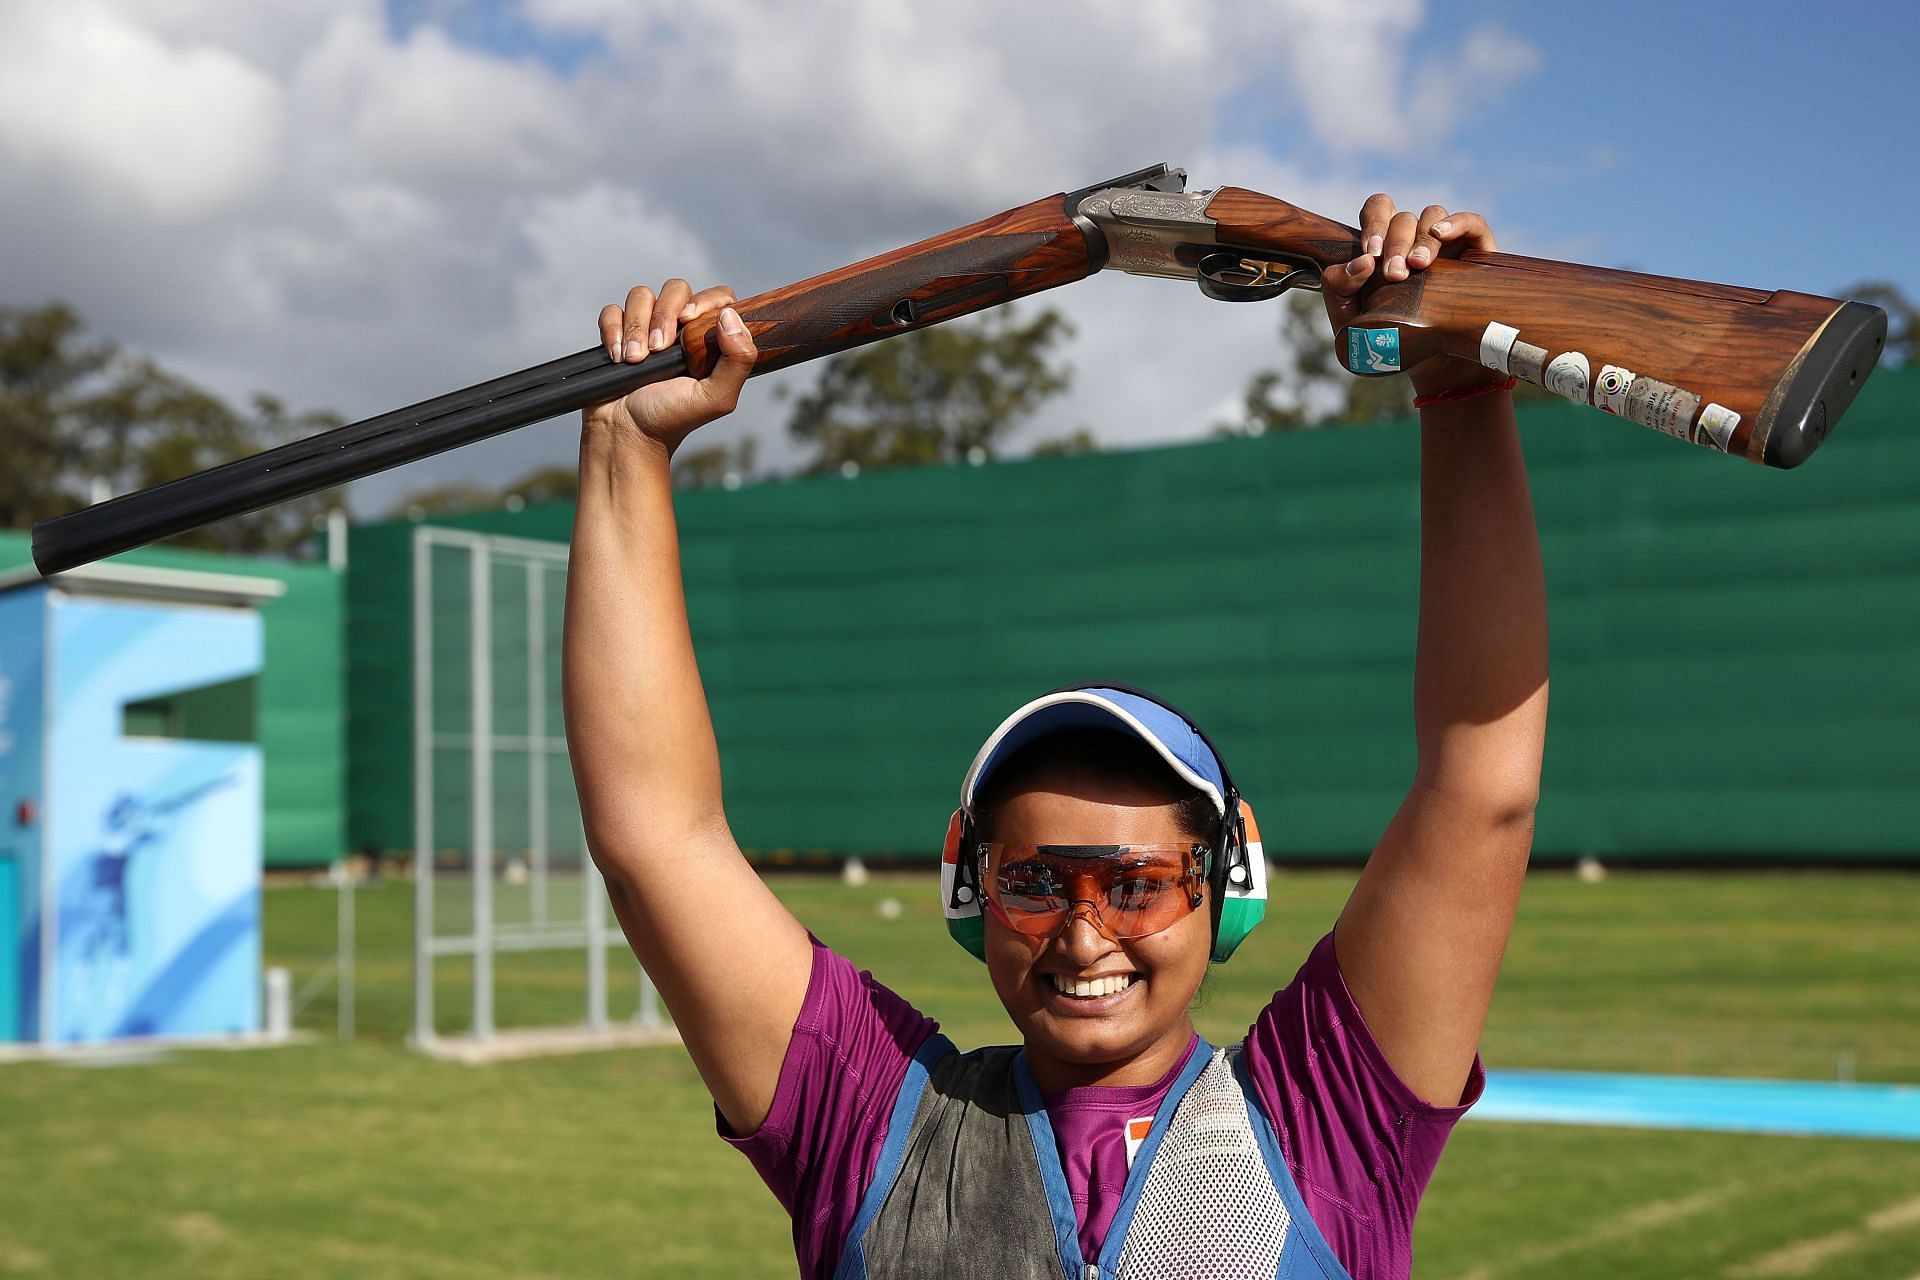 Shooting - Commonwealth Games Day 7